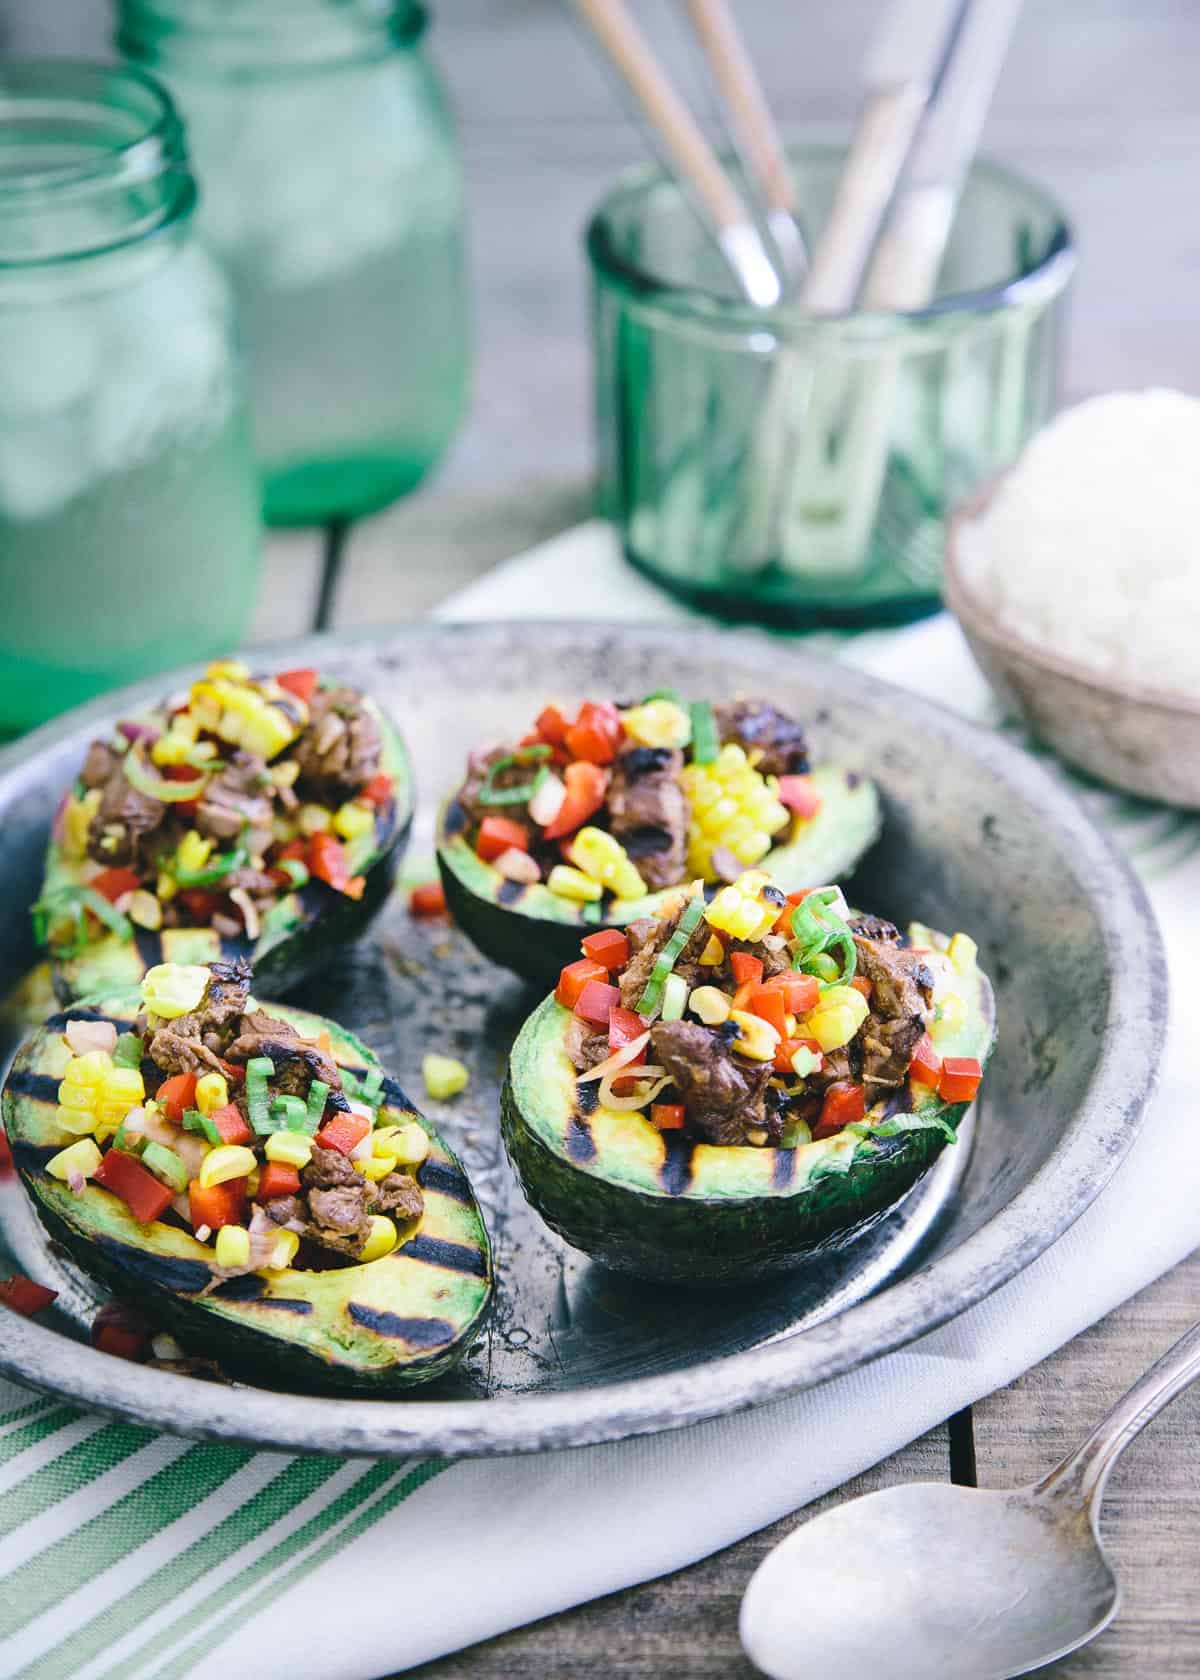 These grilled avocados are stuffed with Asian marinated steak, red peppers, grilled corn and scallions. Serve with a side of rice for a great summer meal!